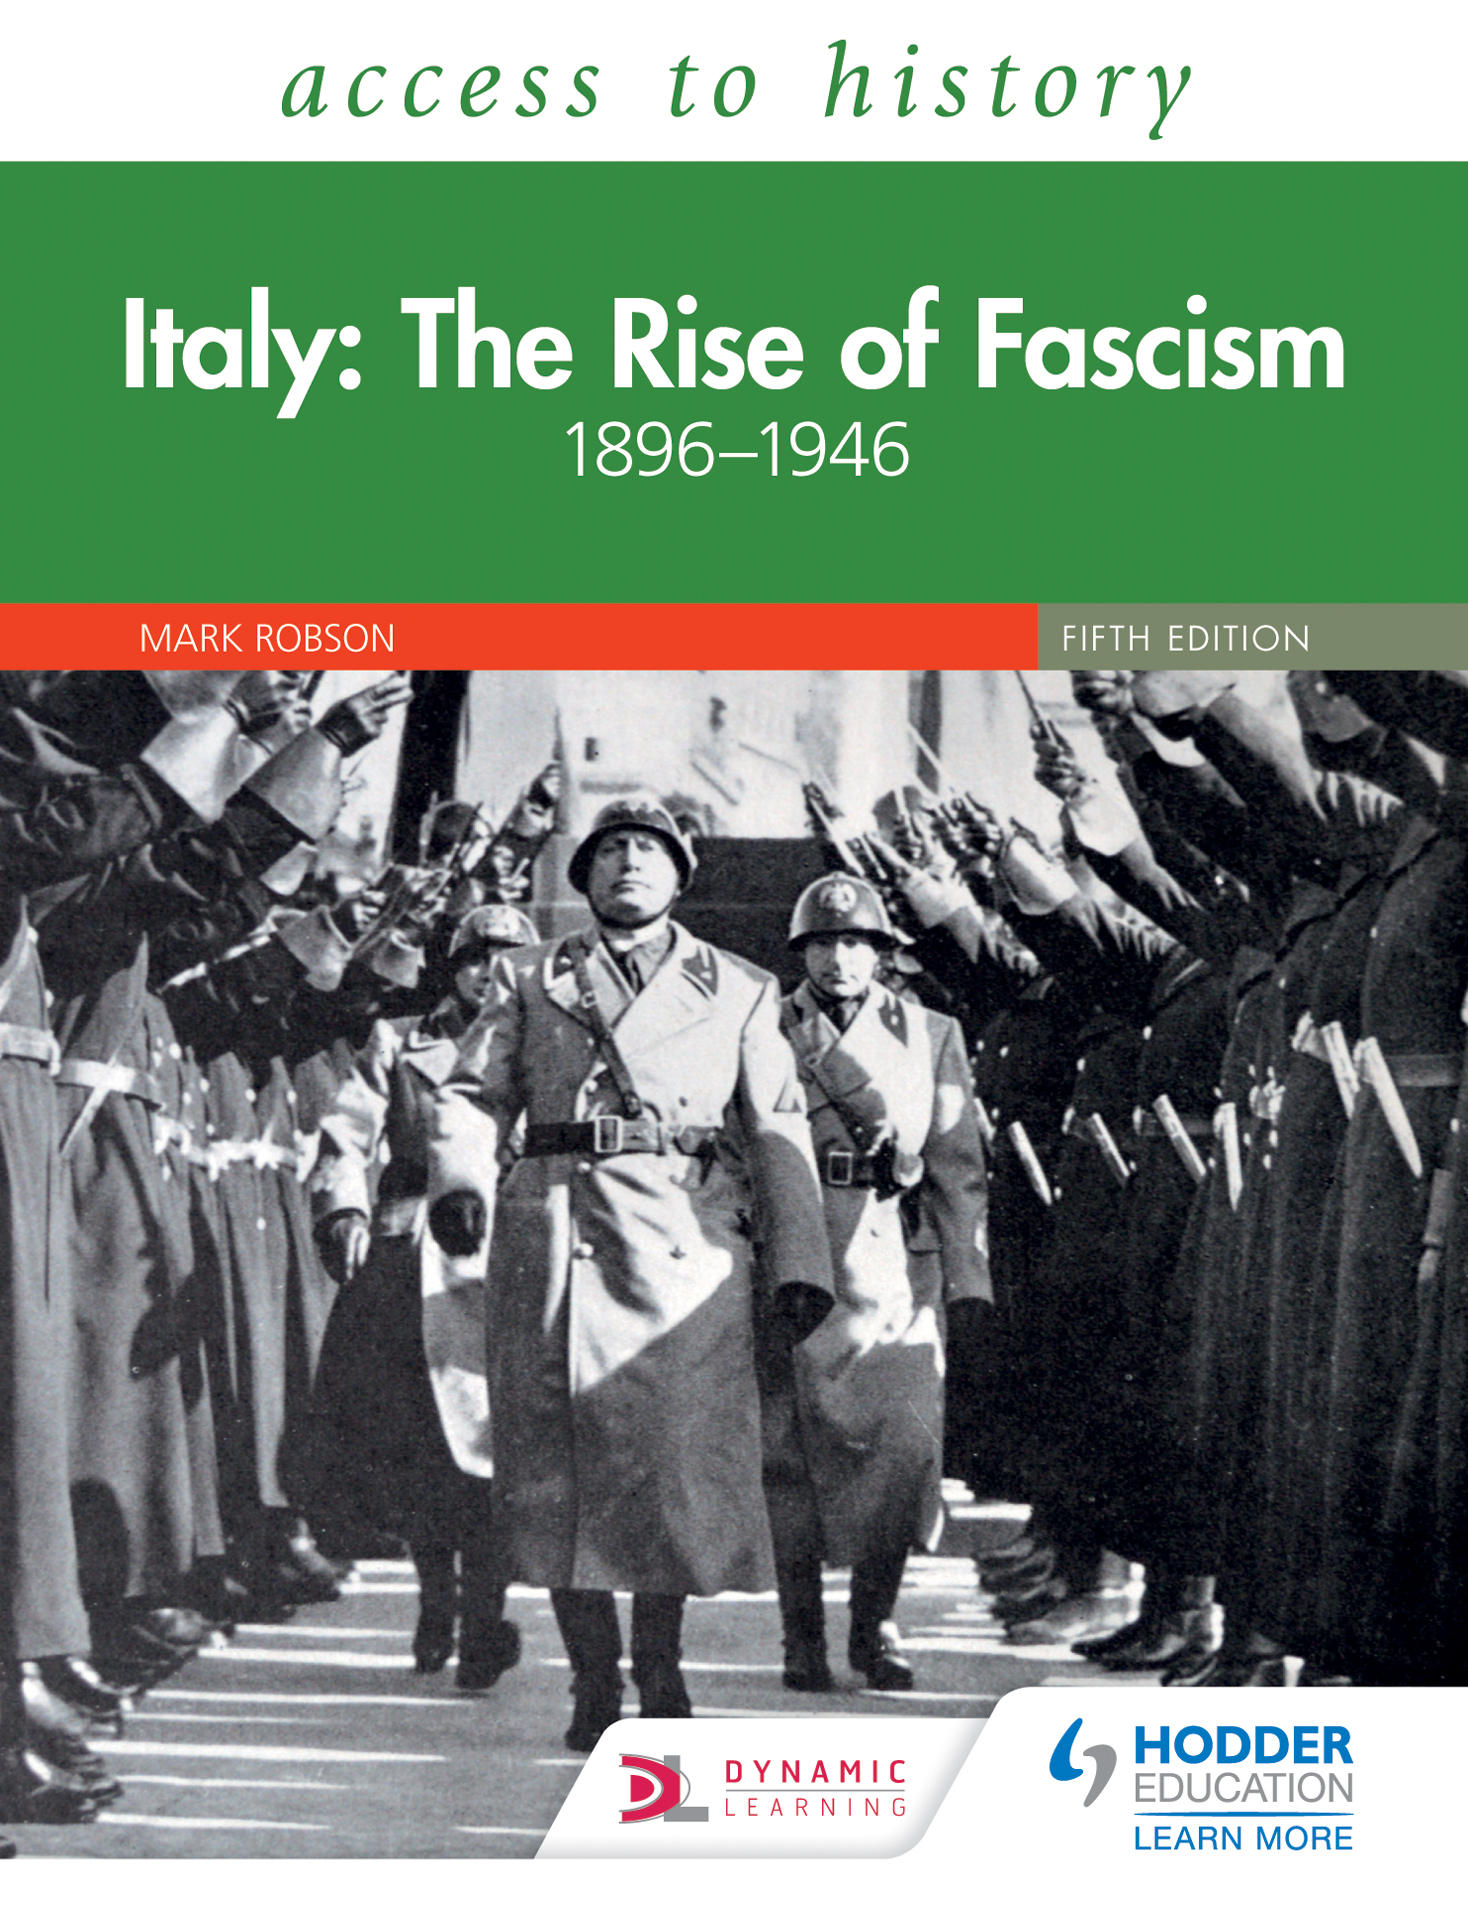 ATH: Italy: The Rise of Fascism 1896-1946 Fifth Edition